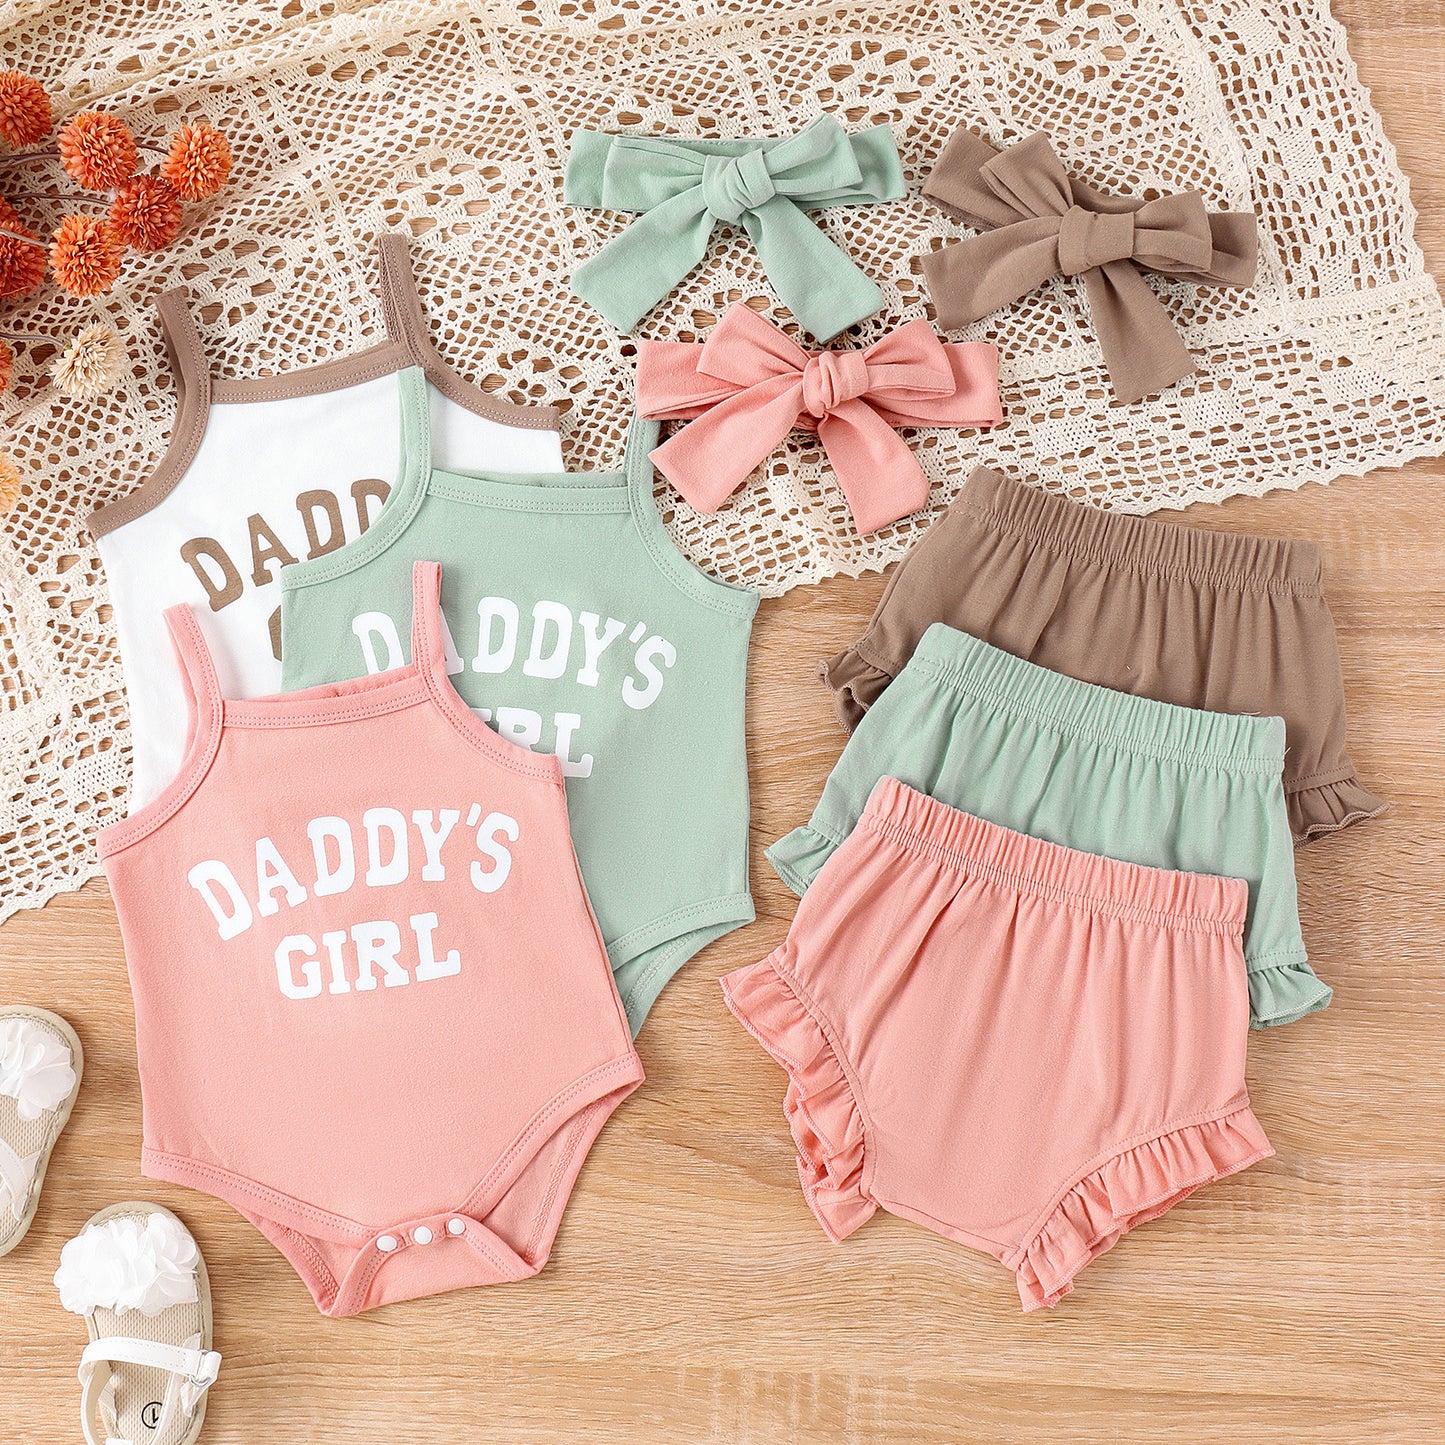 Girls' Letter Camisole Shorts Suit Summer